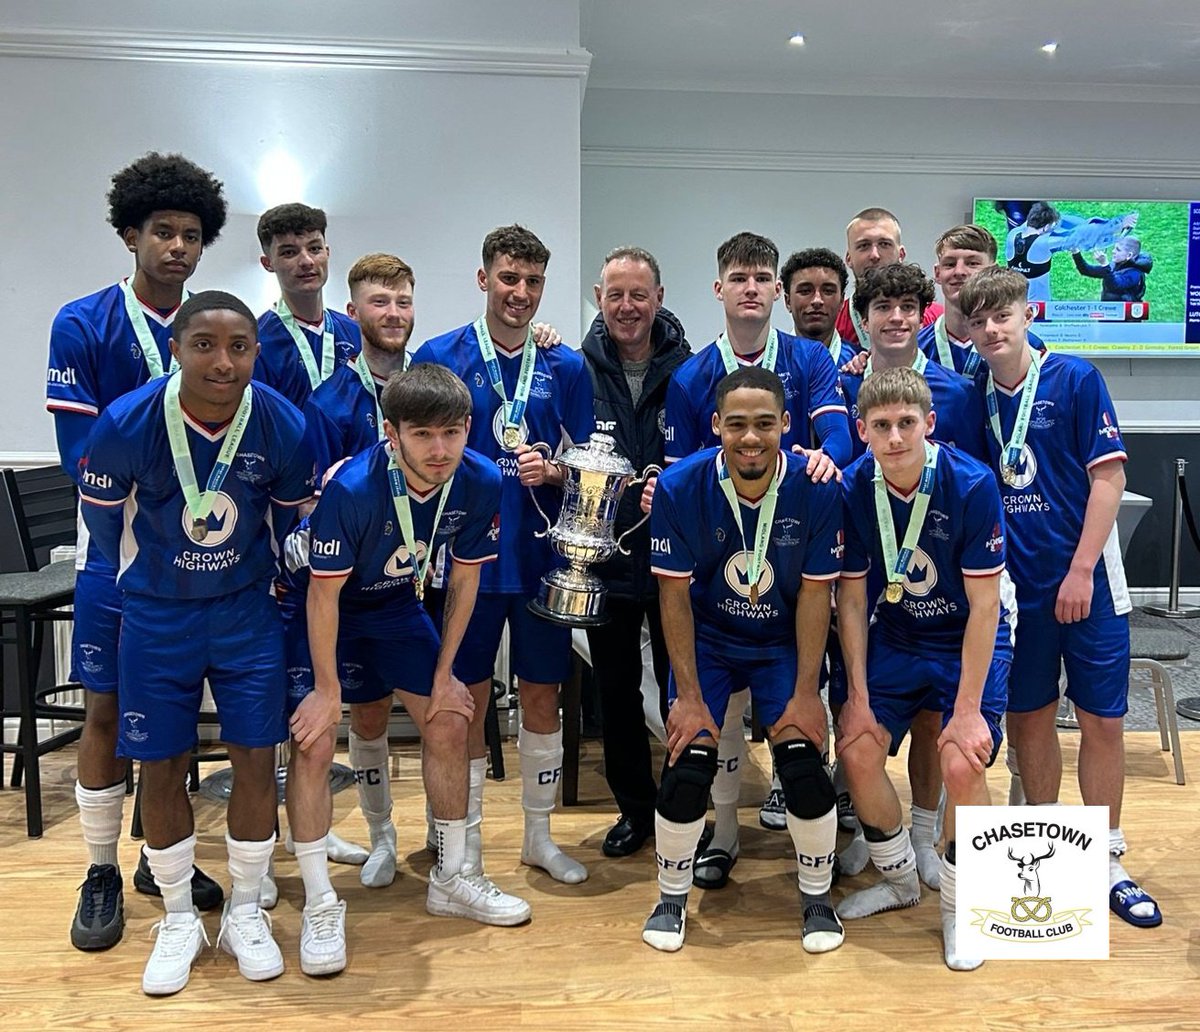 💙🏆🫎 LEAGUE WINNERS 🫎🏆💙 The YDP u23s got their league winning medals today. Nigel Wood from the @MidlandLeague popped in to present them. If you've not been to an u23s match, you should. These lads are just brilliant to be around. Really well deserved, a great team 💙